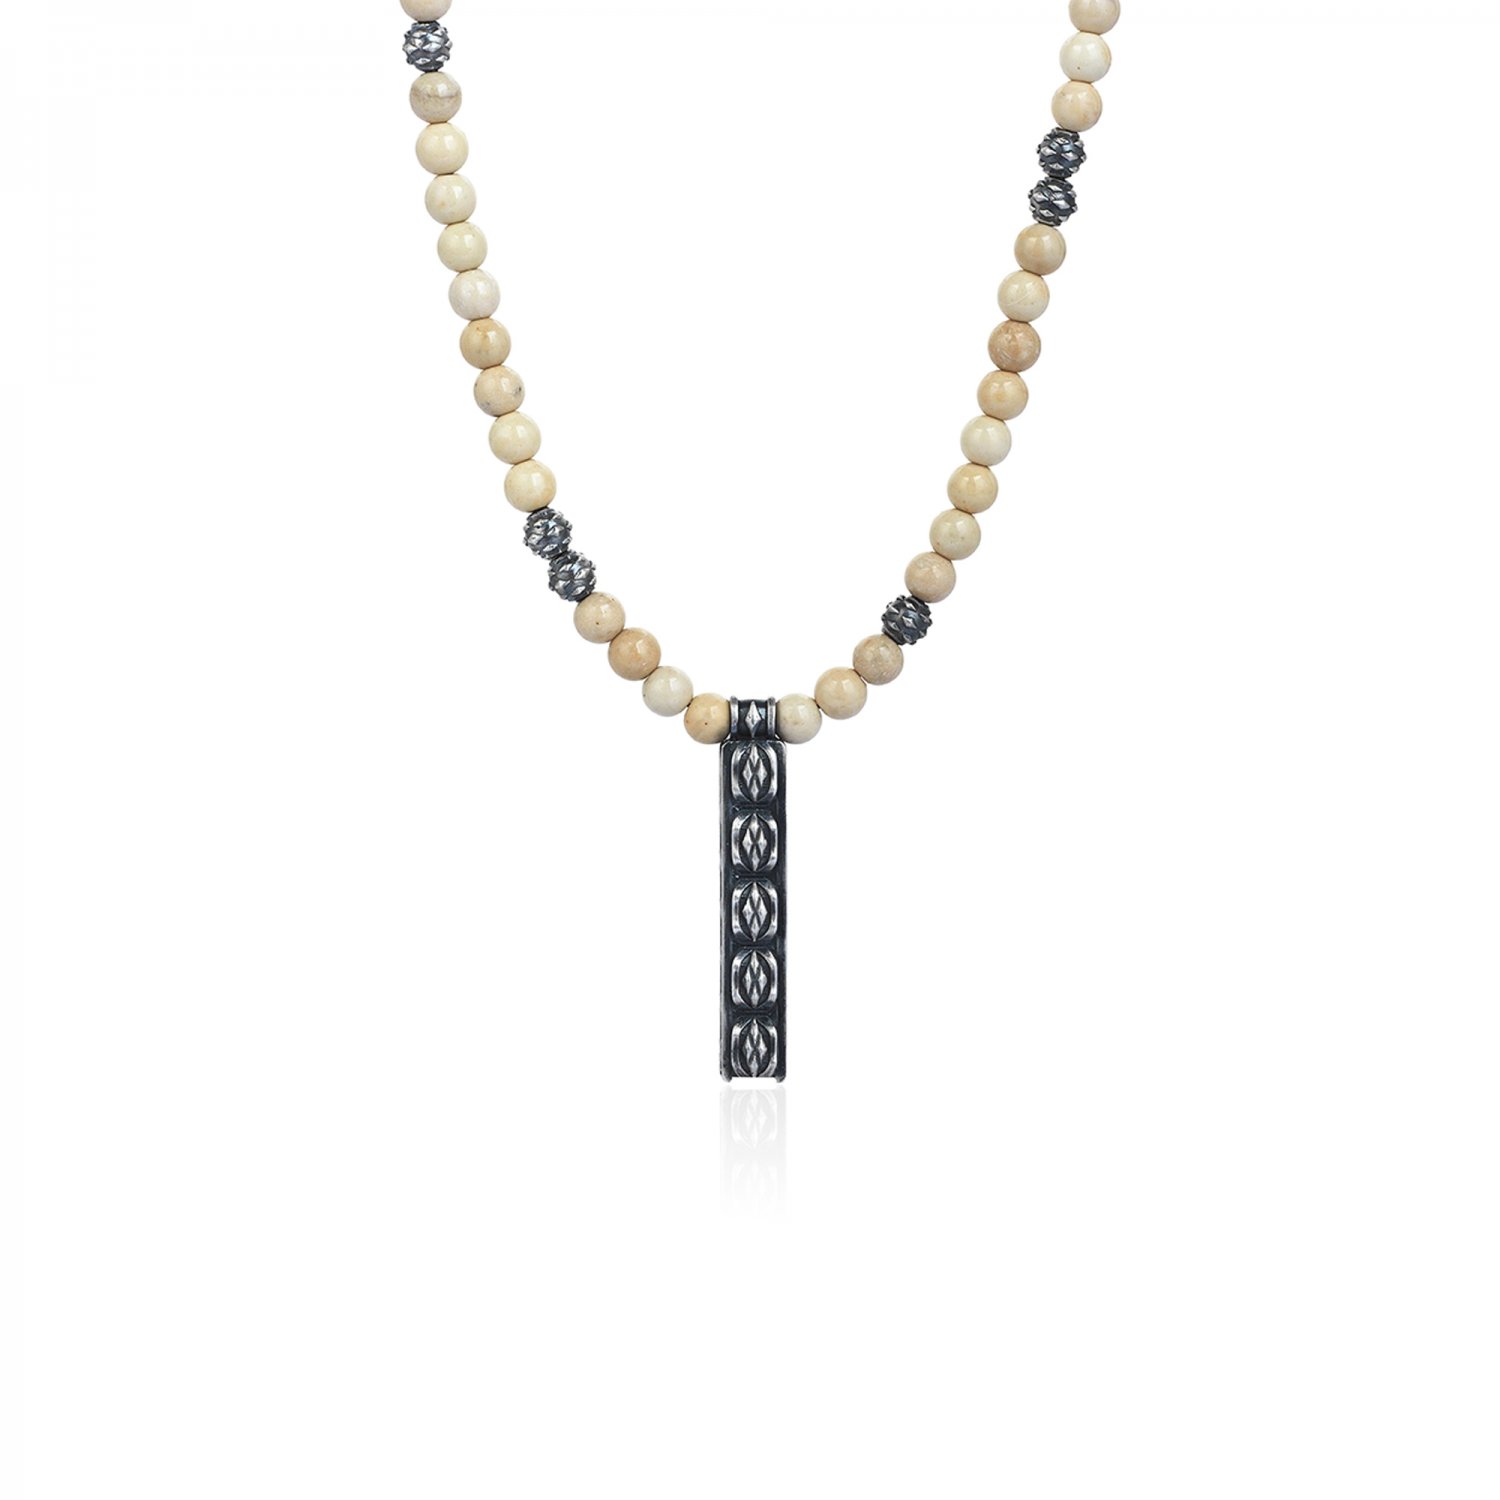 Cubic Style Beads Necklace with River Stone